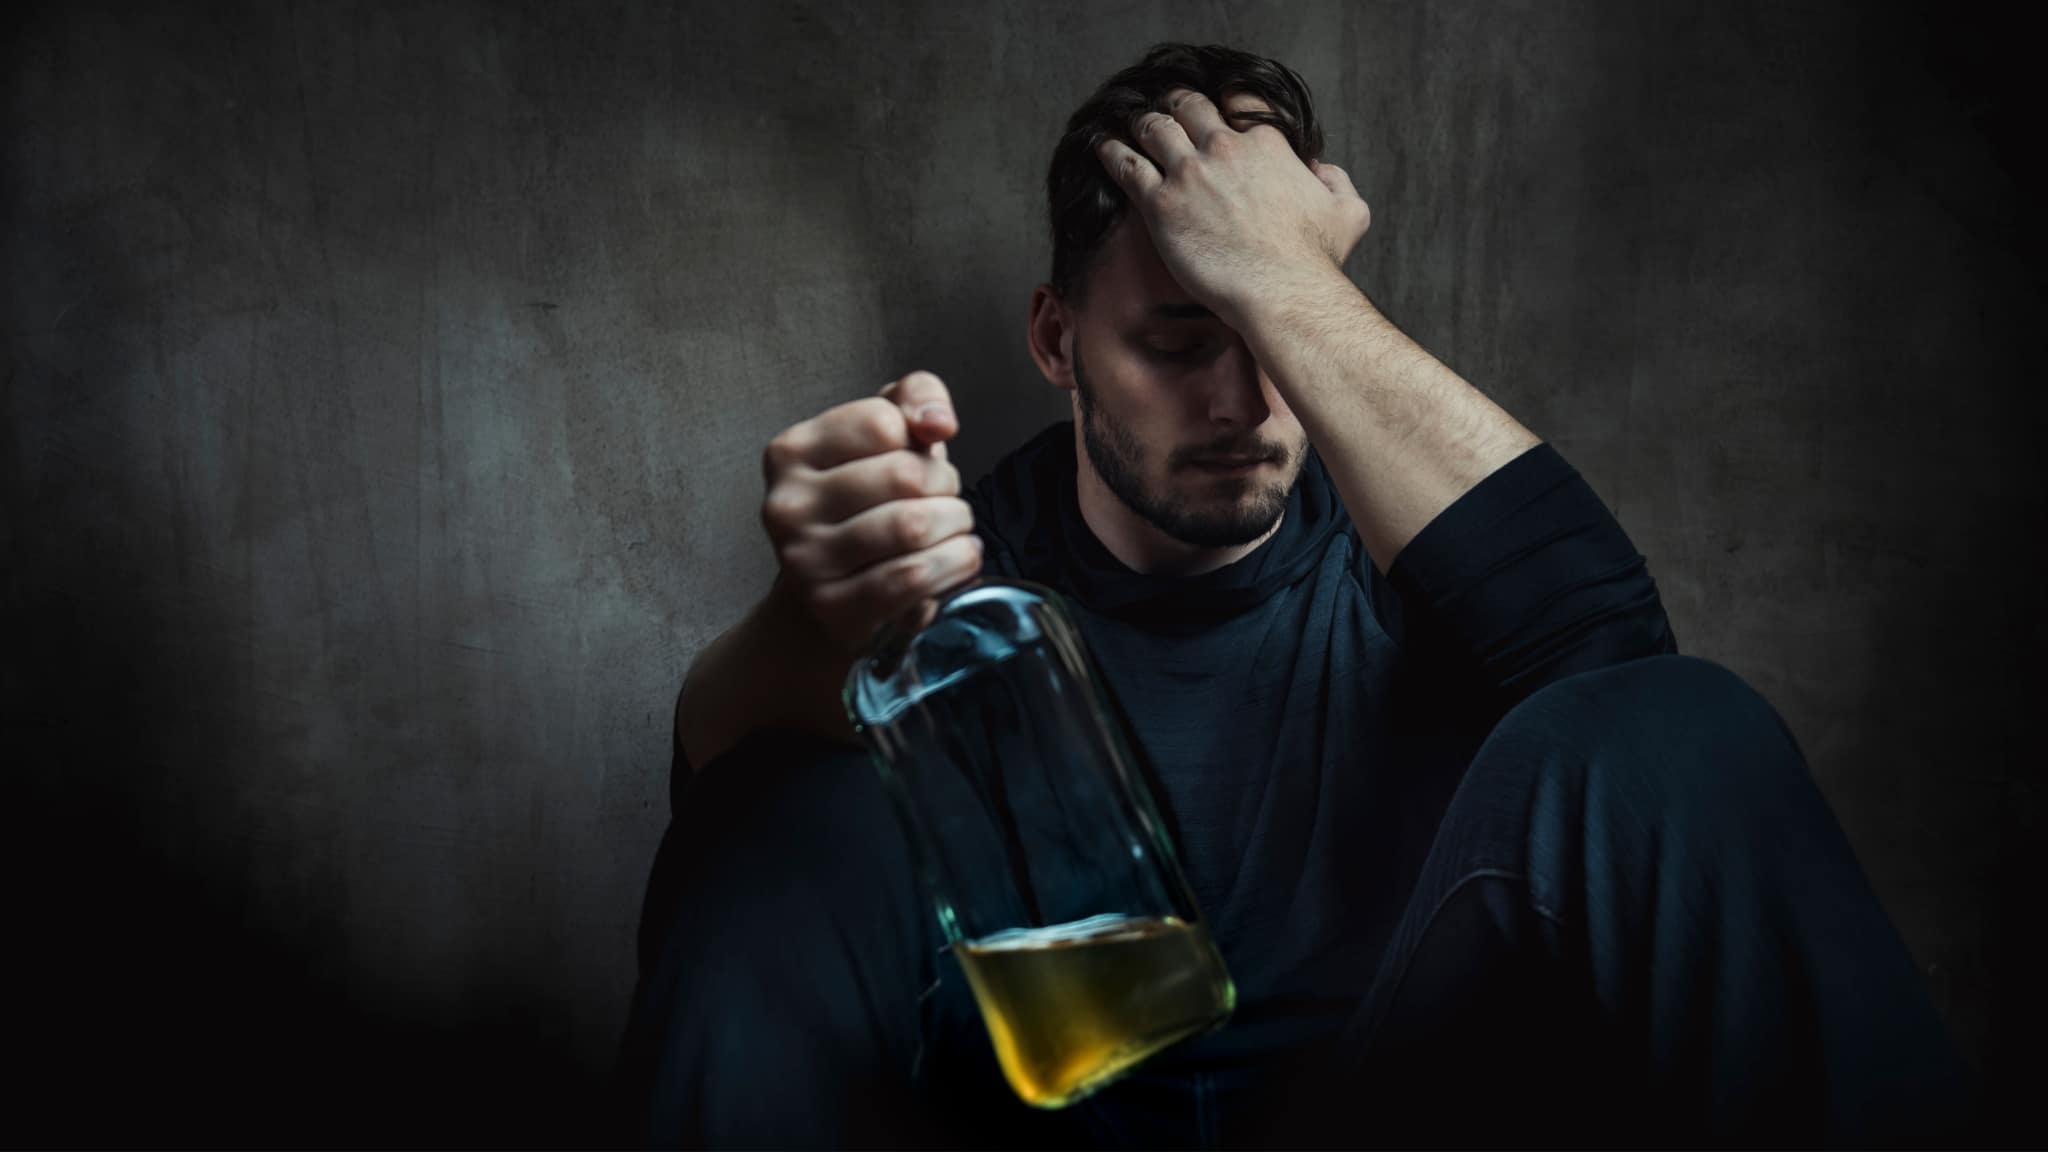 Negative-Effects-of-Alcohol-Abuse-on-the-Body